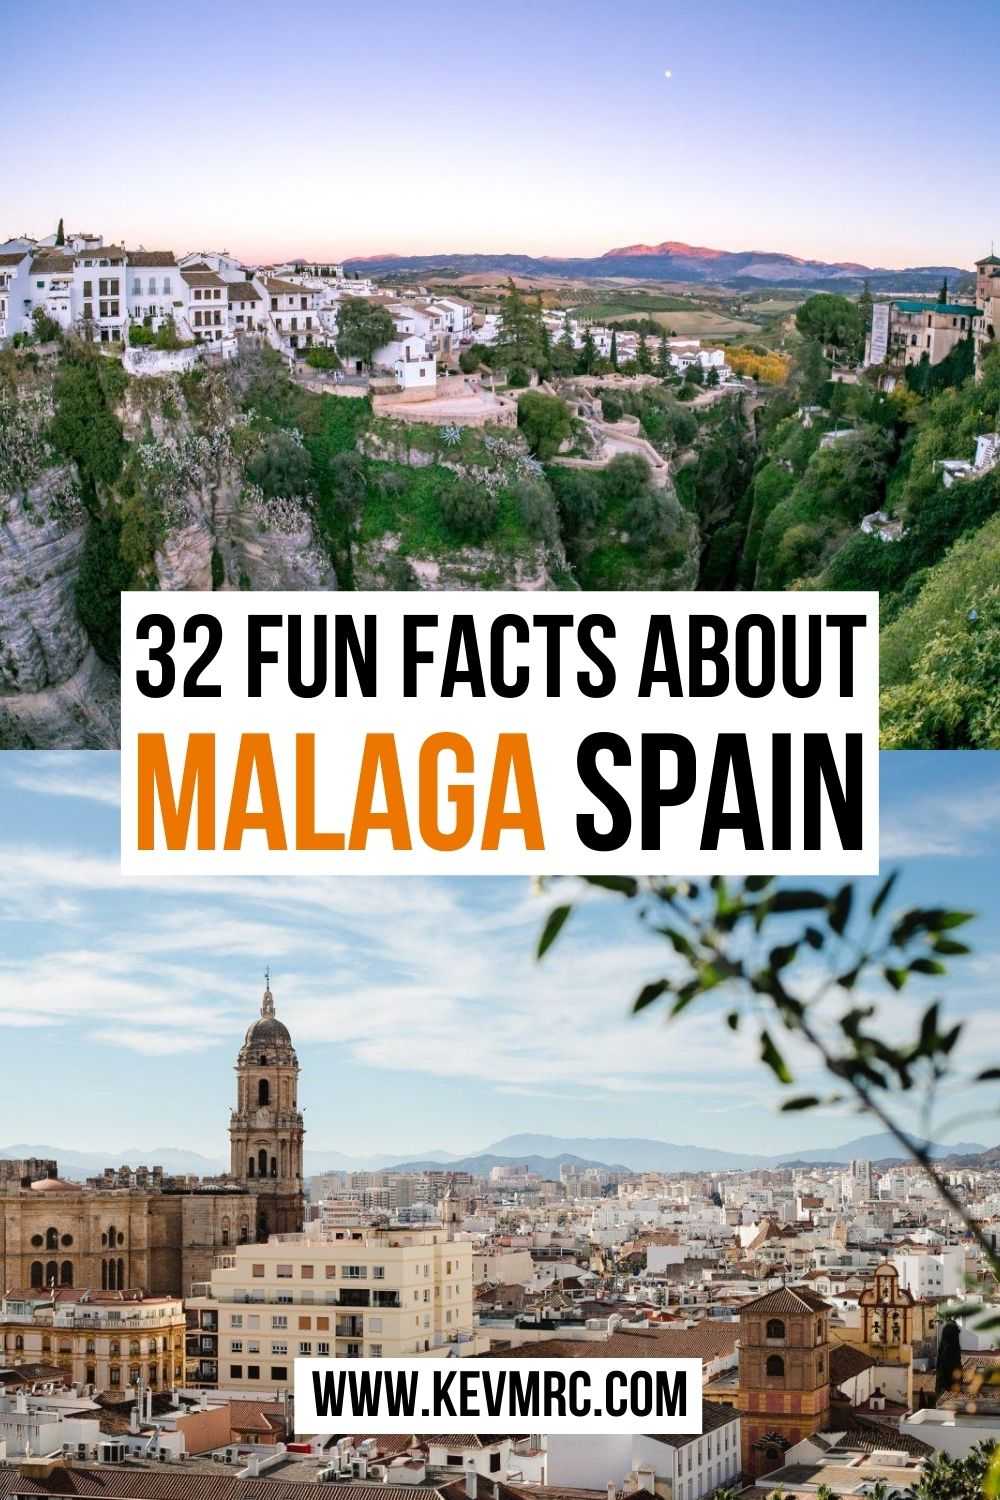 Malaga is a city located in Andalusia, in the south of Spain on the Mediterranean coast. Learn more with these 32 interesting facts about Malaga Spain! malaga spain facts | malaga facts | spain facts fun | fun facts about spain #spainfacts #malaga